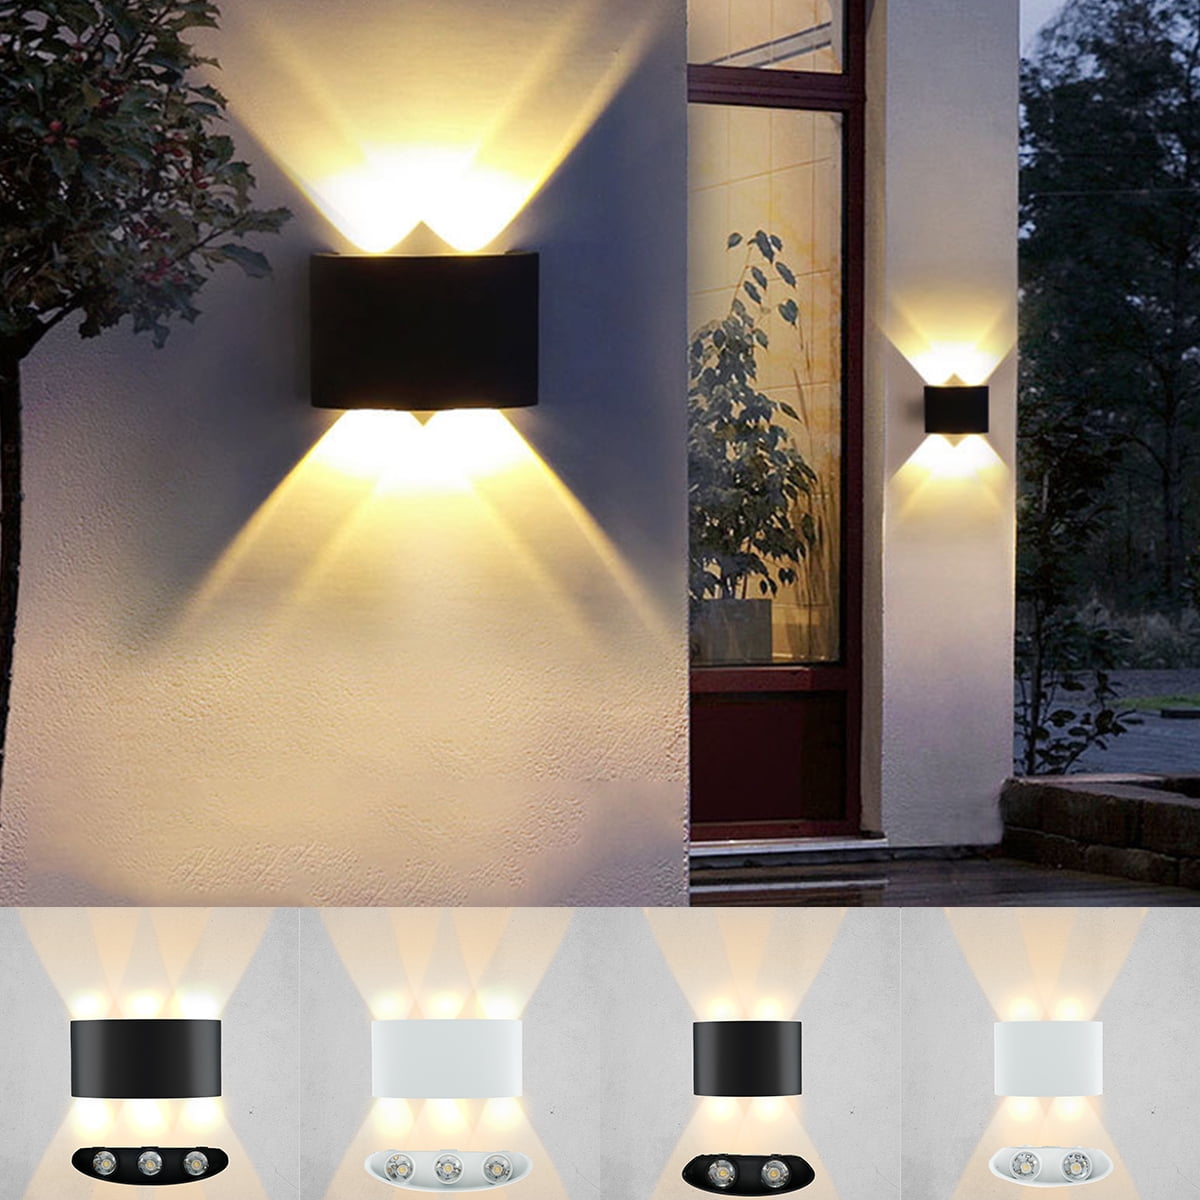 2W 4W 6W 8W LED Up/Down Wall Light IP65 Waterproof Sconce Outdoor Indoor Lamp 